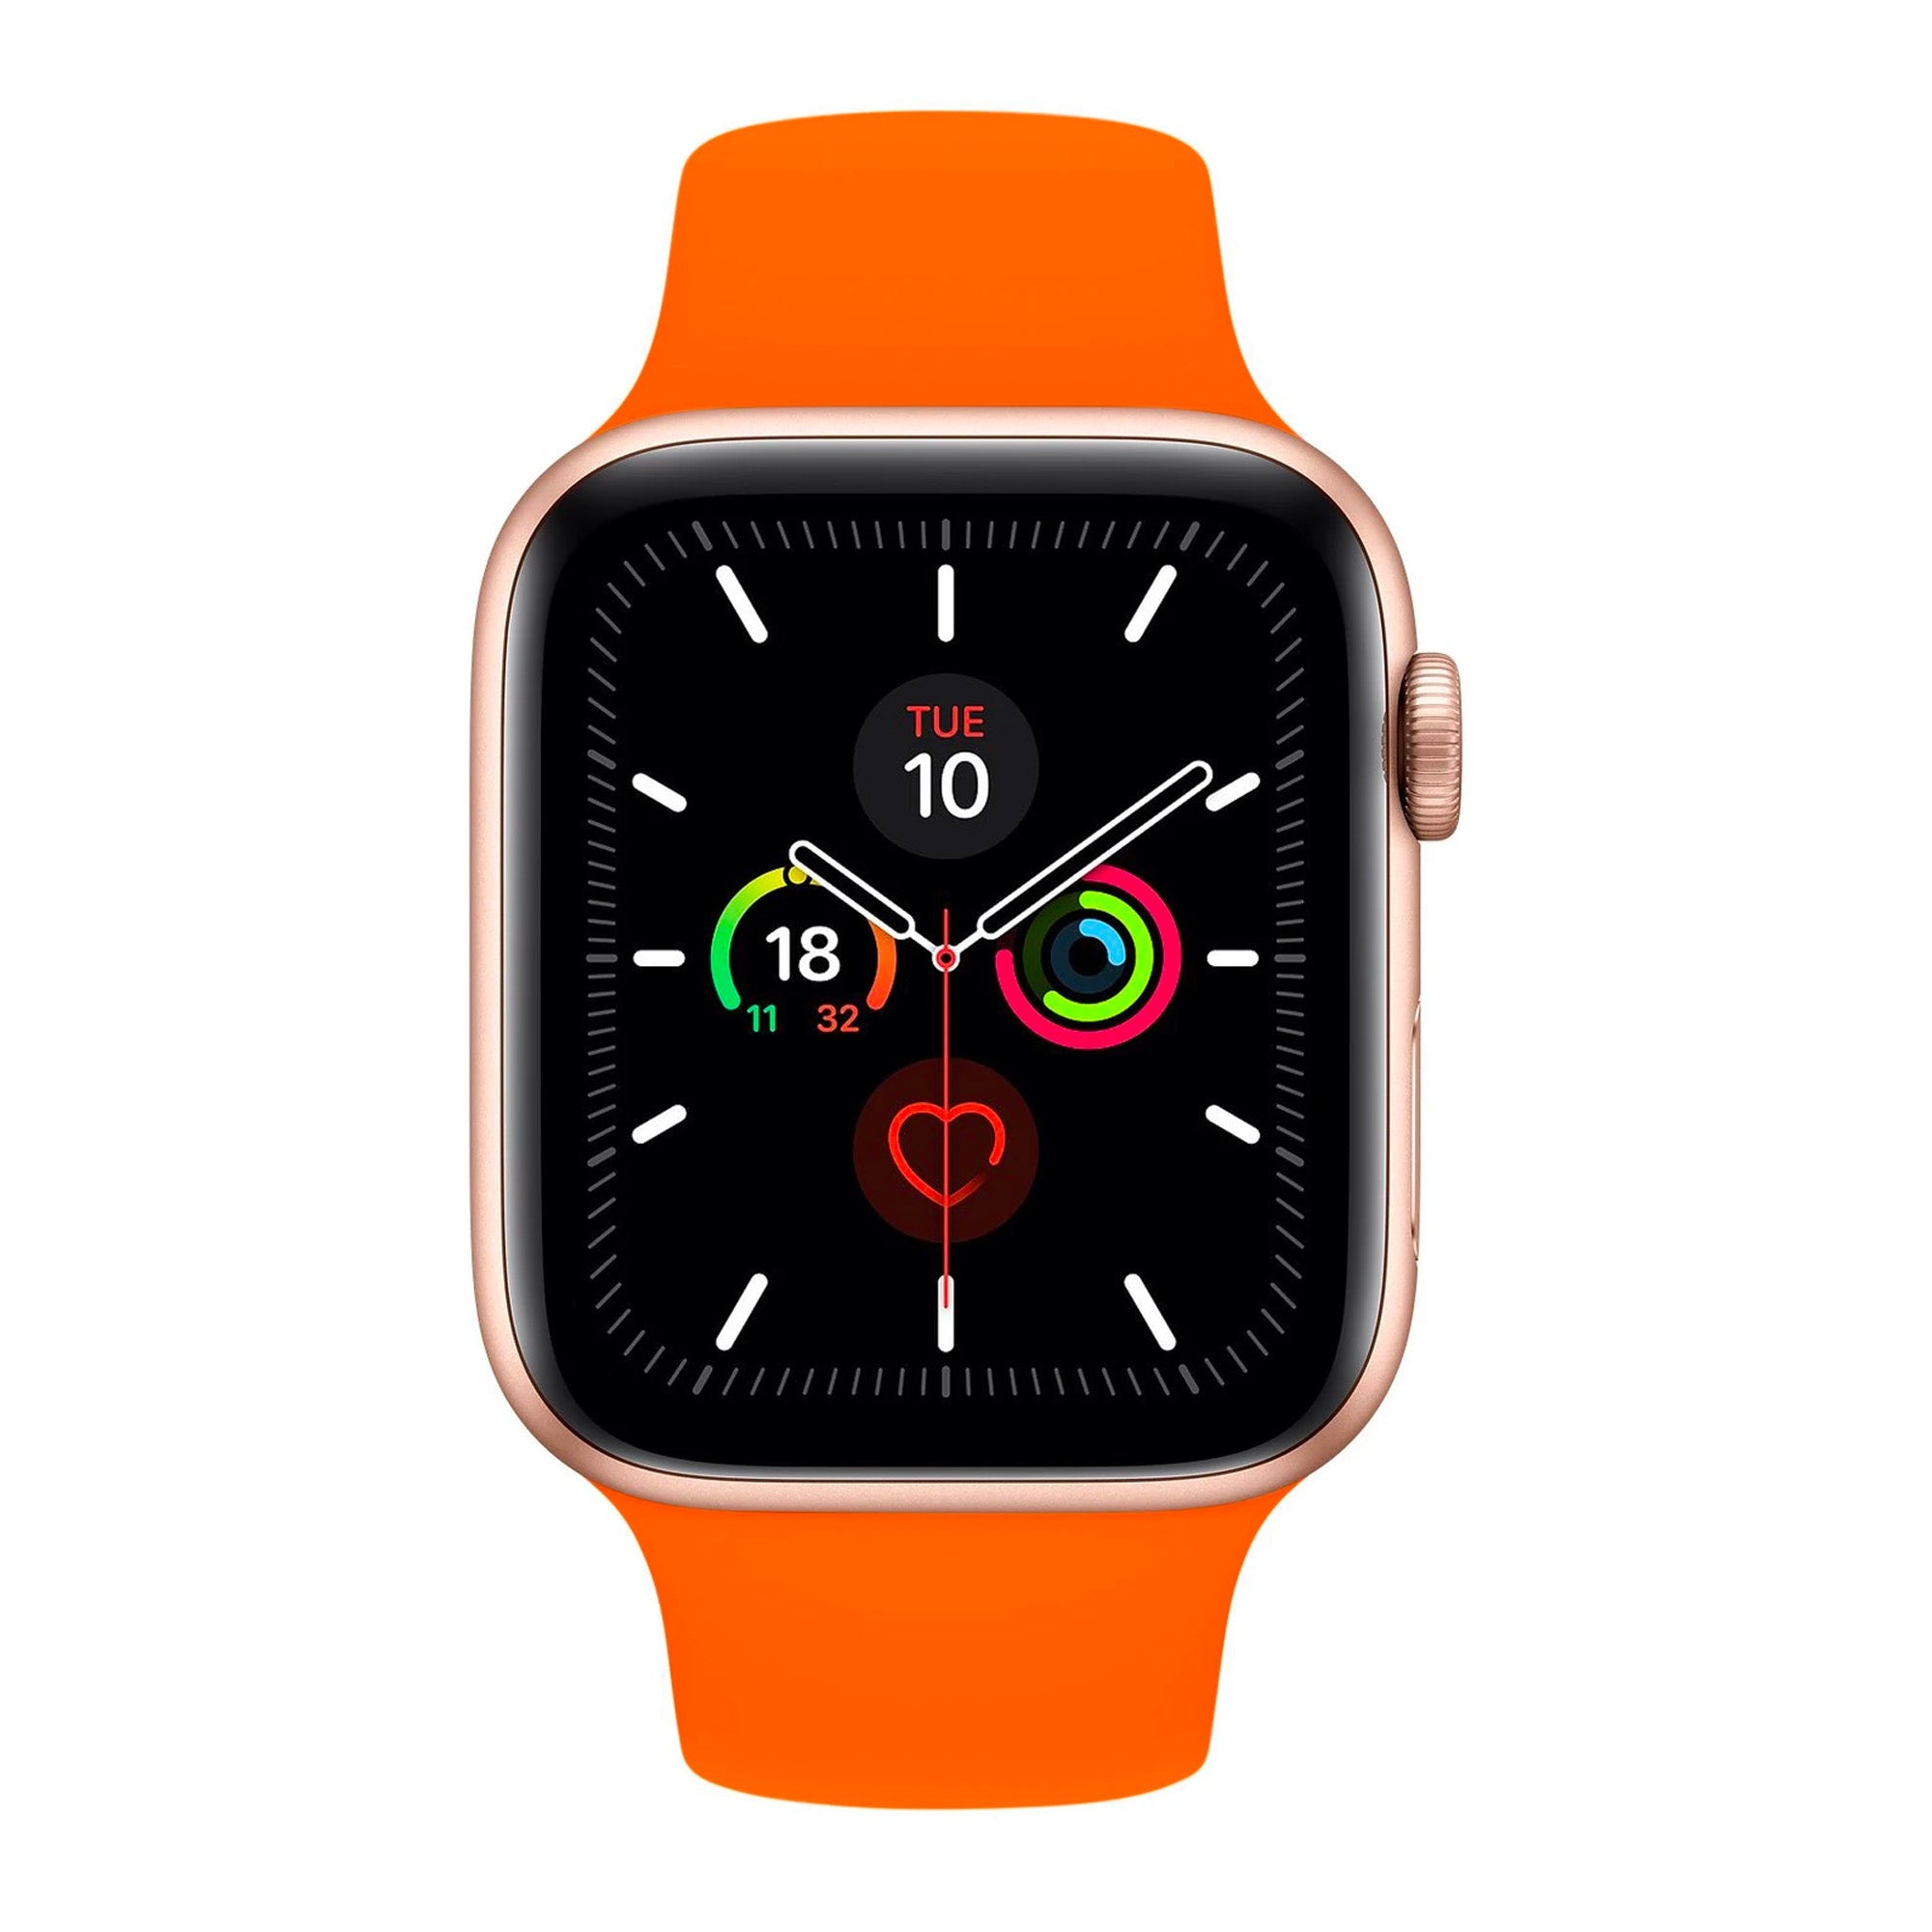 Vitamin C Silicone Band for Apple Watch Silicone Bands   Accessories Gifts UK